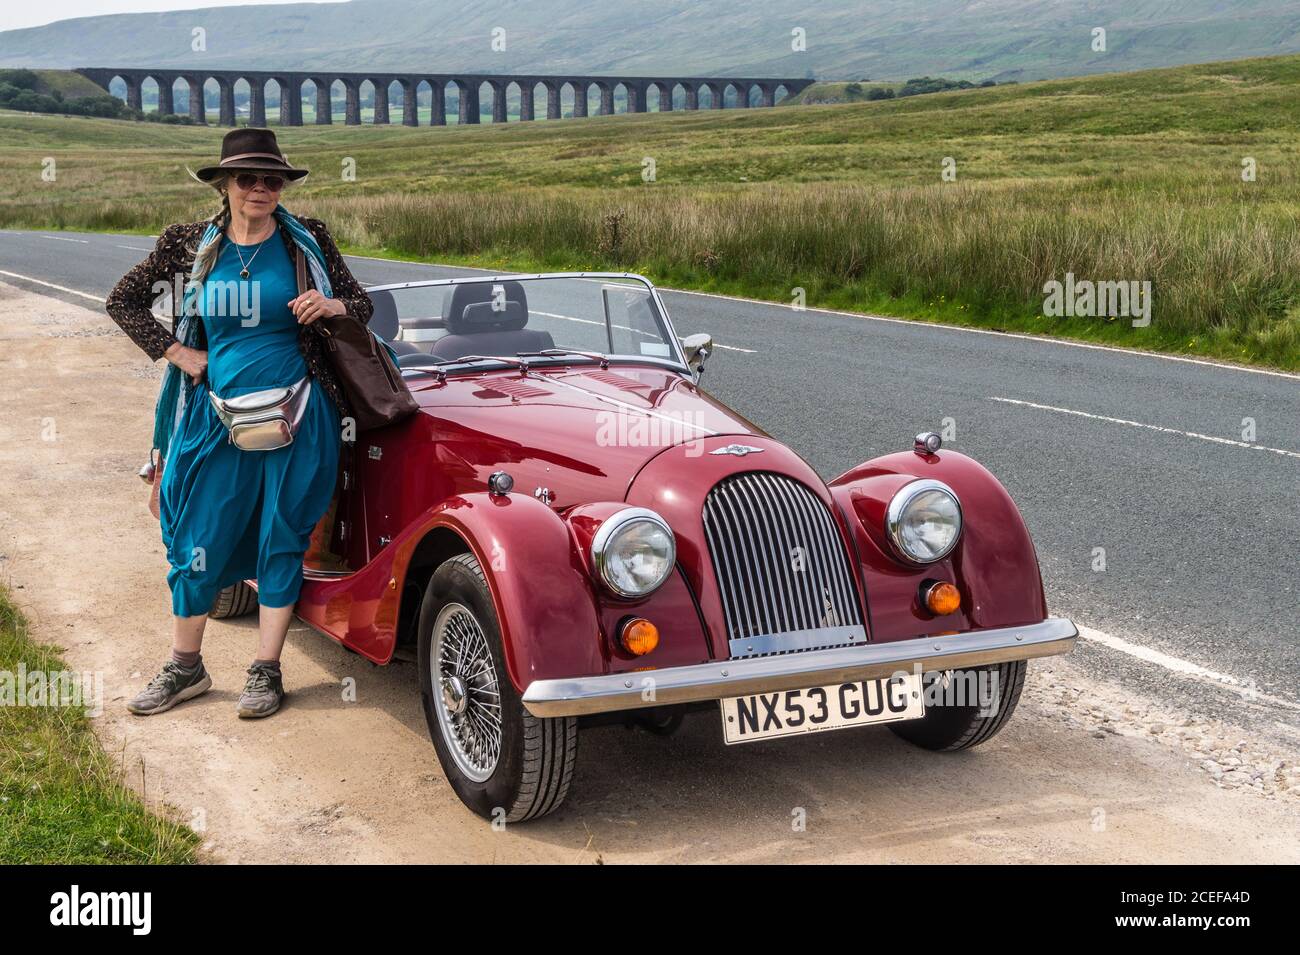 A woman in a turquoise dress standing by a 2003 model  Morgan 4/4 drop-head coupé sports car, Ribblehead Viaduct, North Yorkshire, England Stock Photo